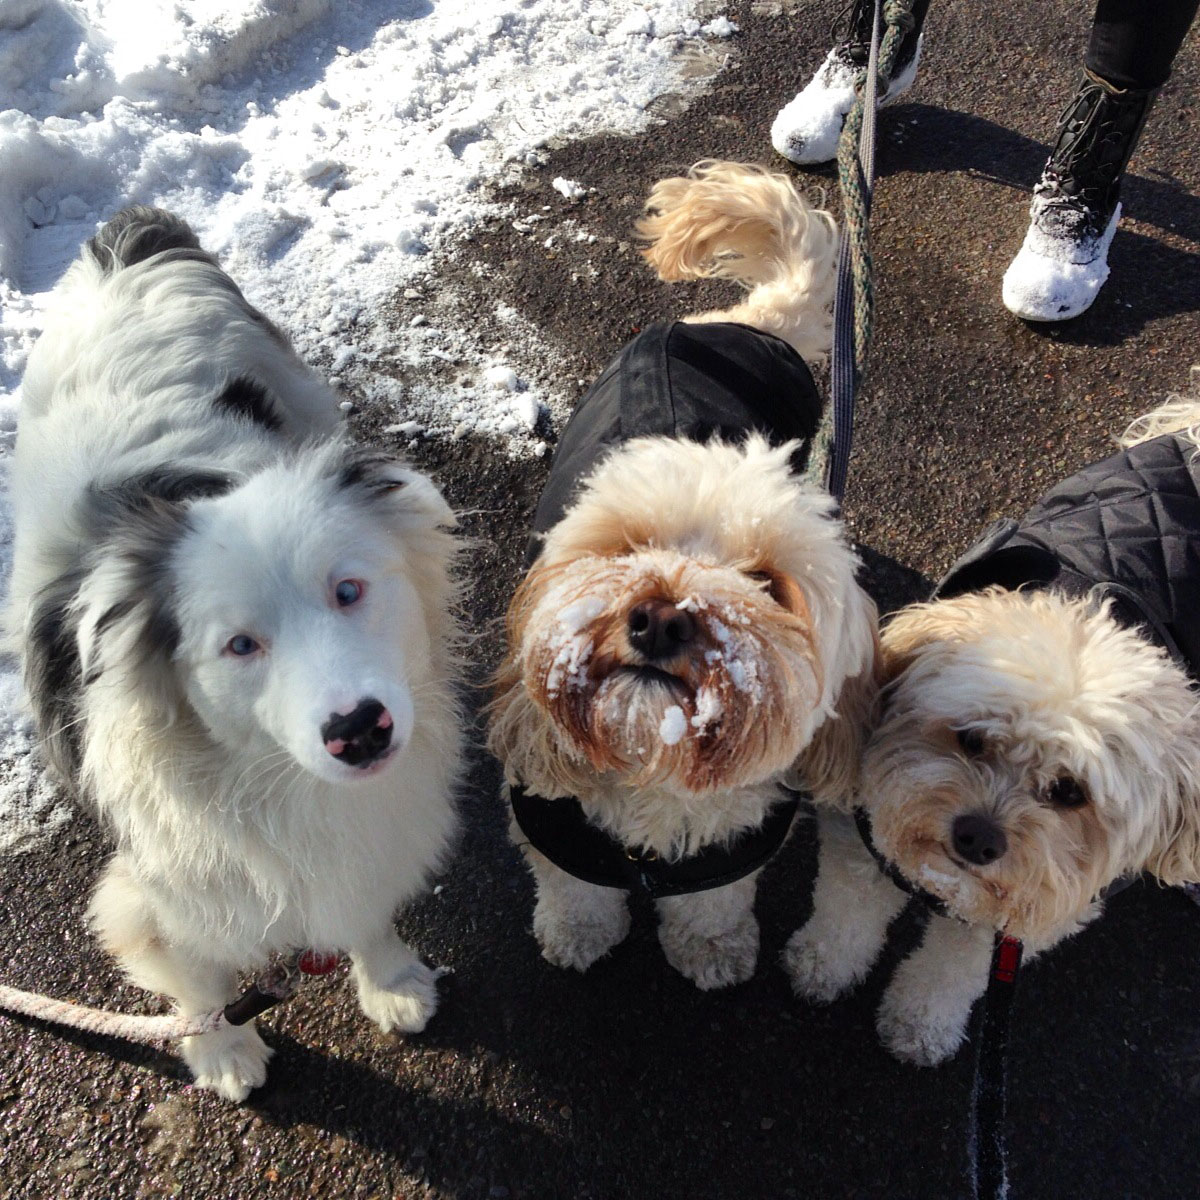 Three fluffy white dogs with snow on their faces